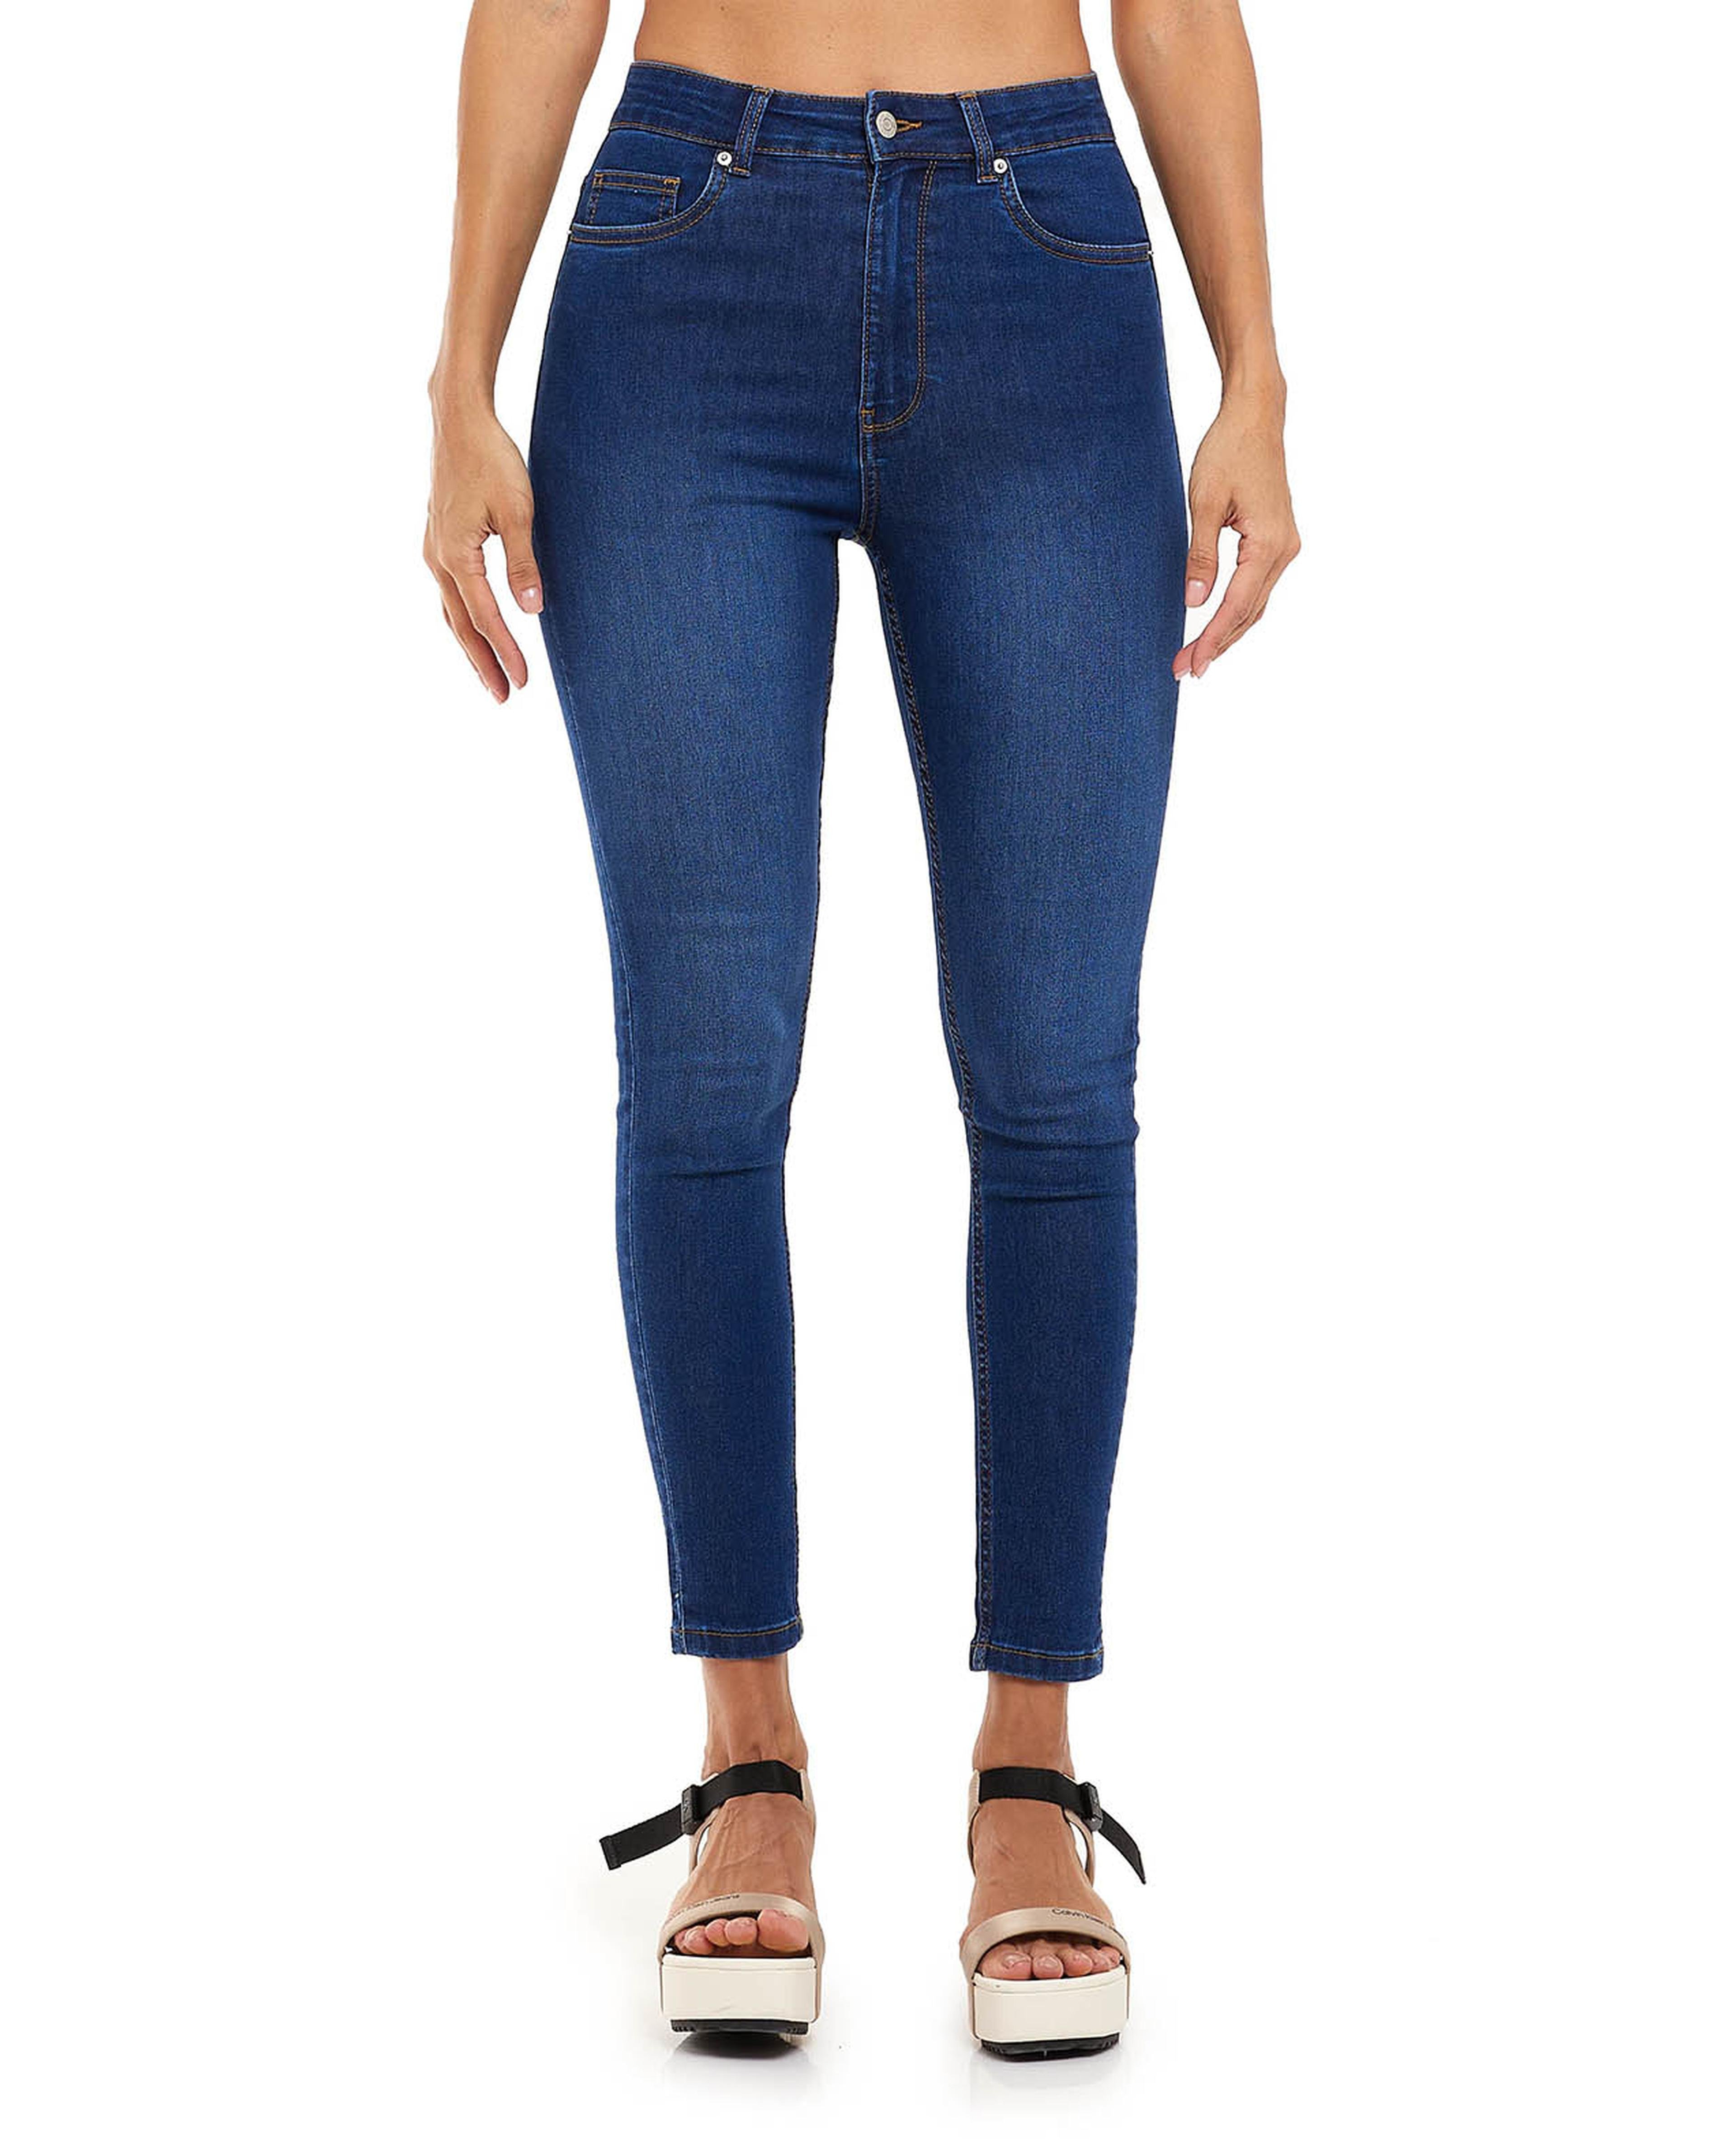 Faded Skinny Fit Jeans with Button Closure